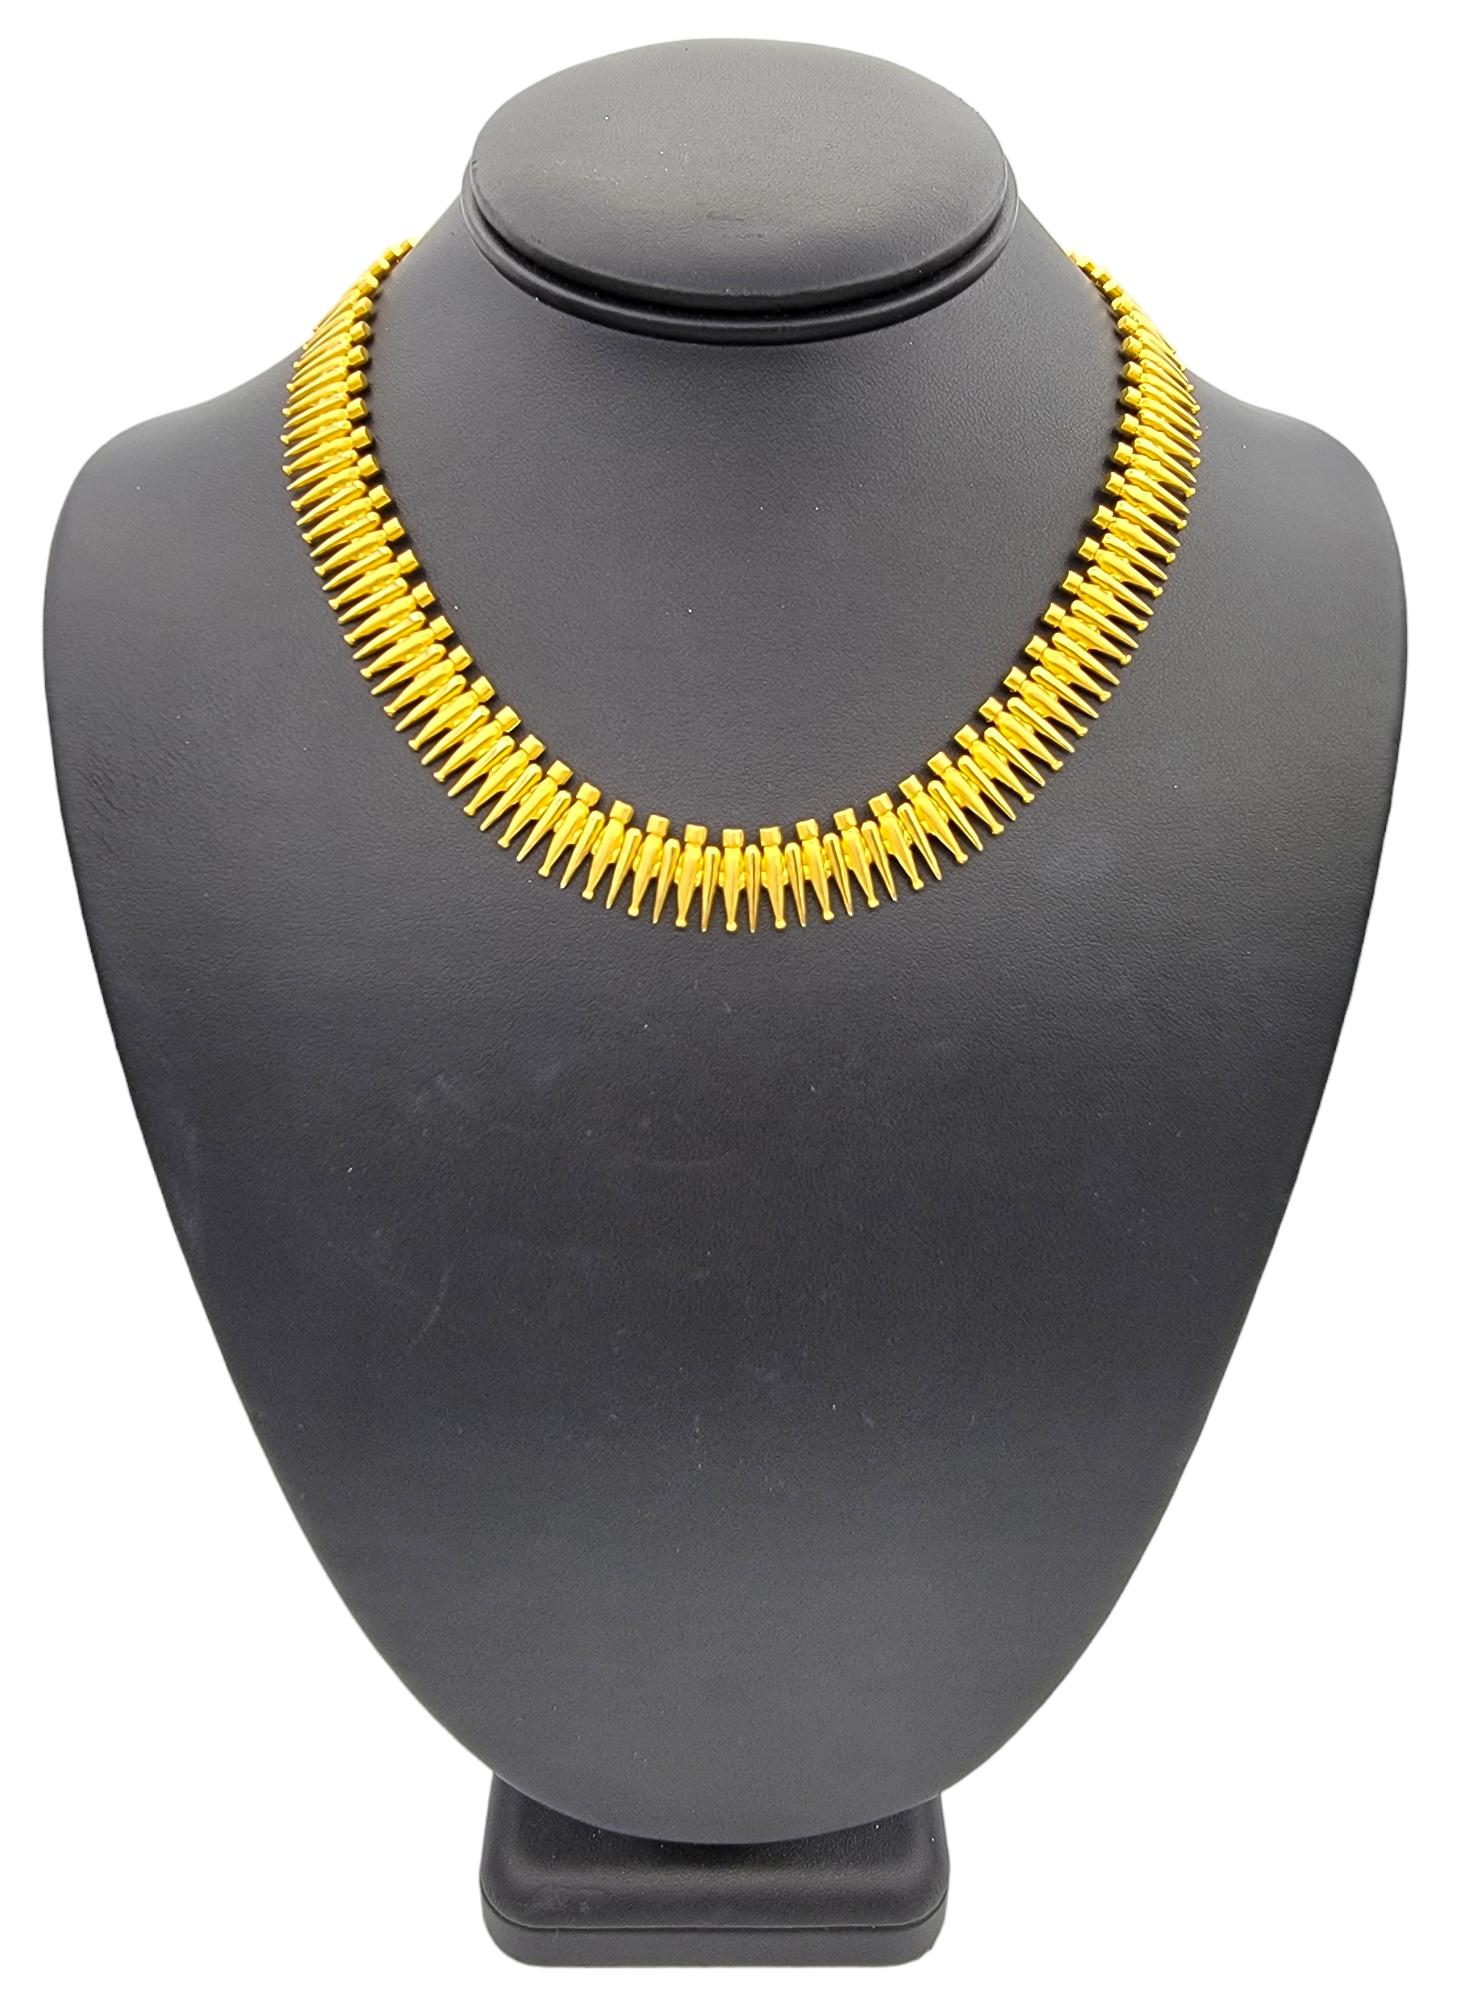 Handmade Spiked Heavy Collar Statement Necklace Set in 18 Karat Yellow Gold For Sale 3